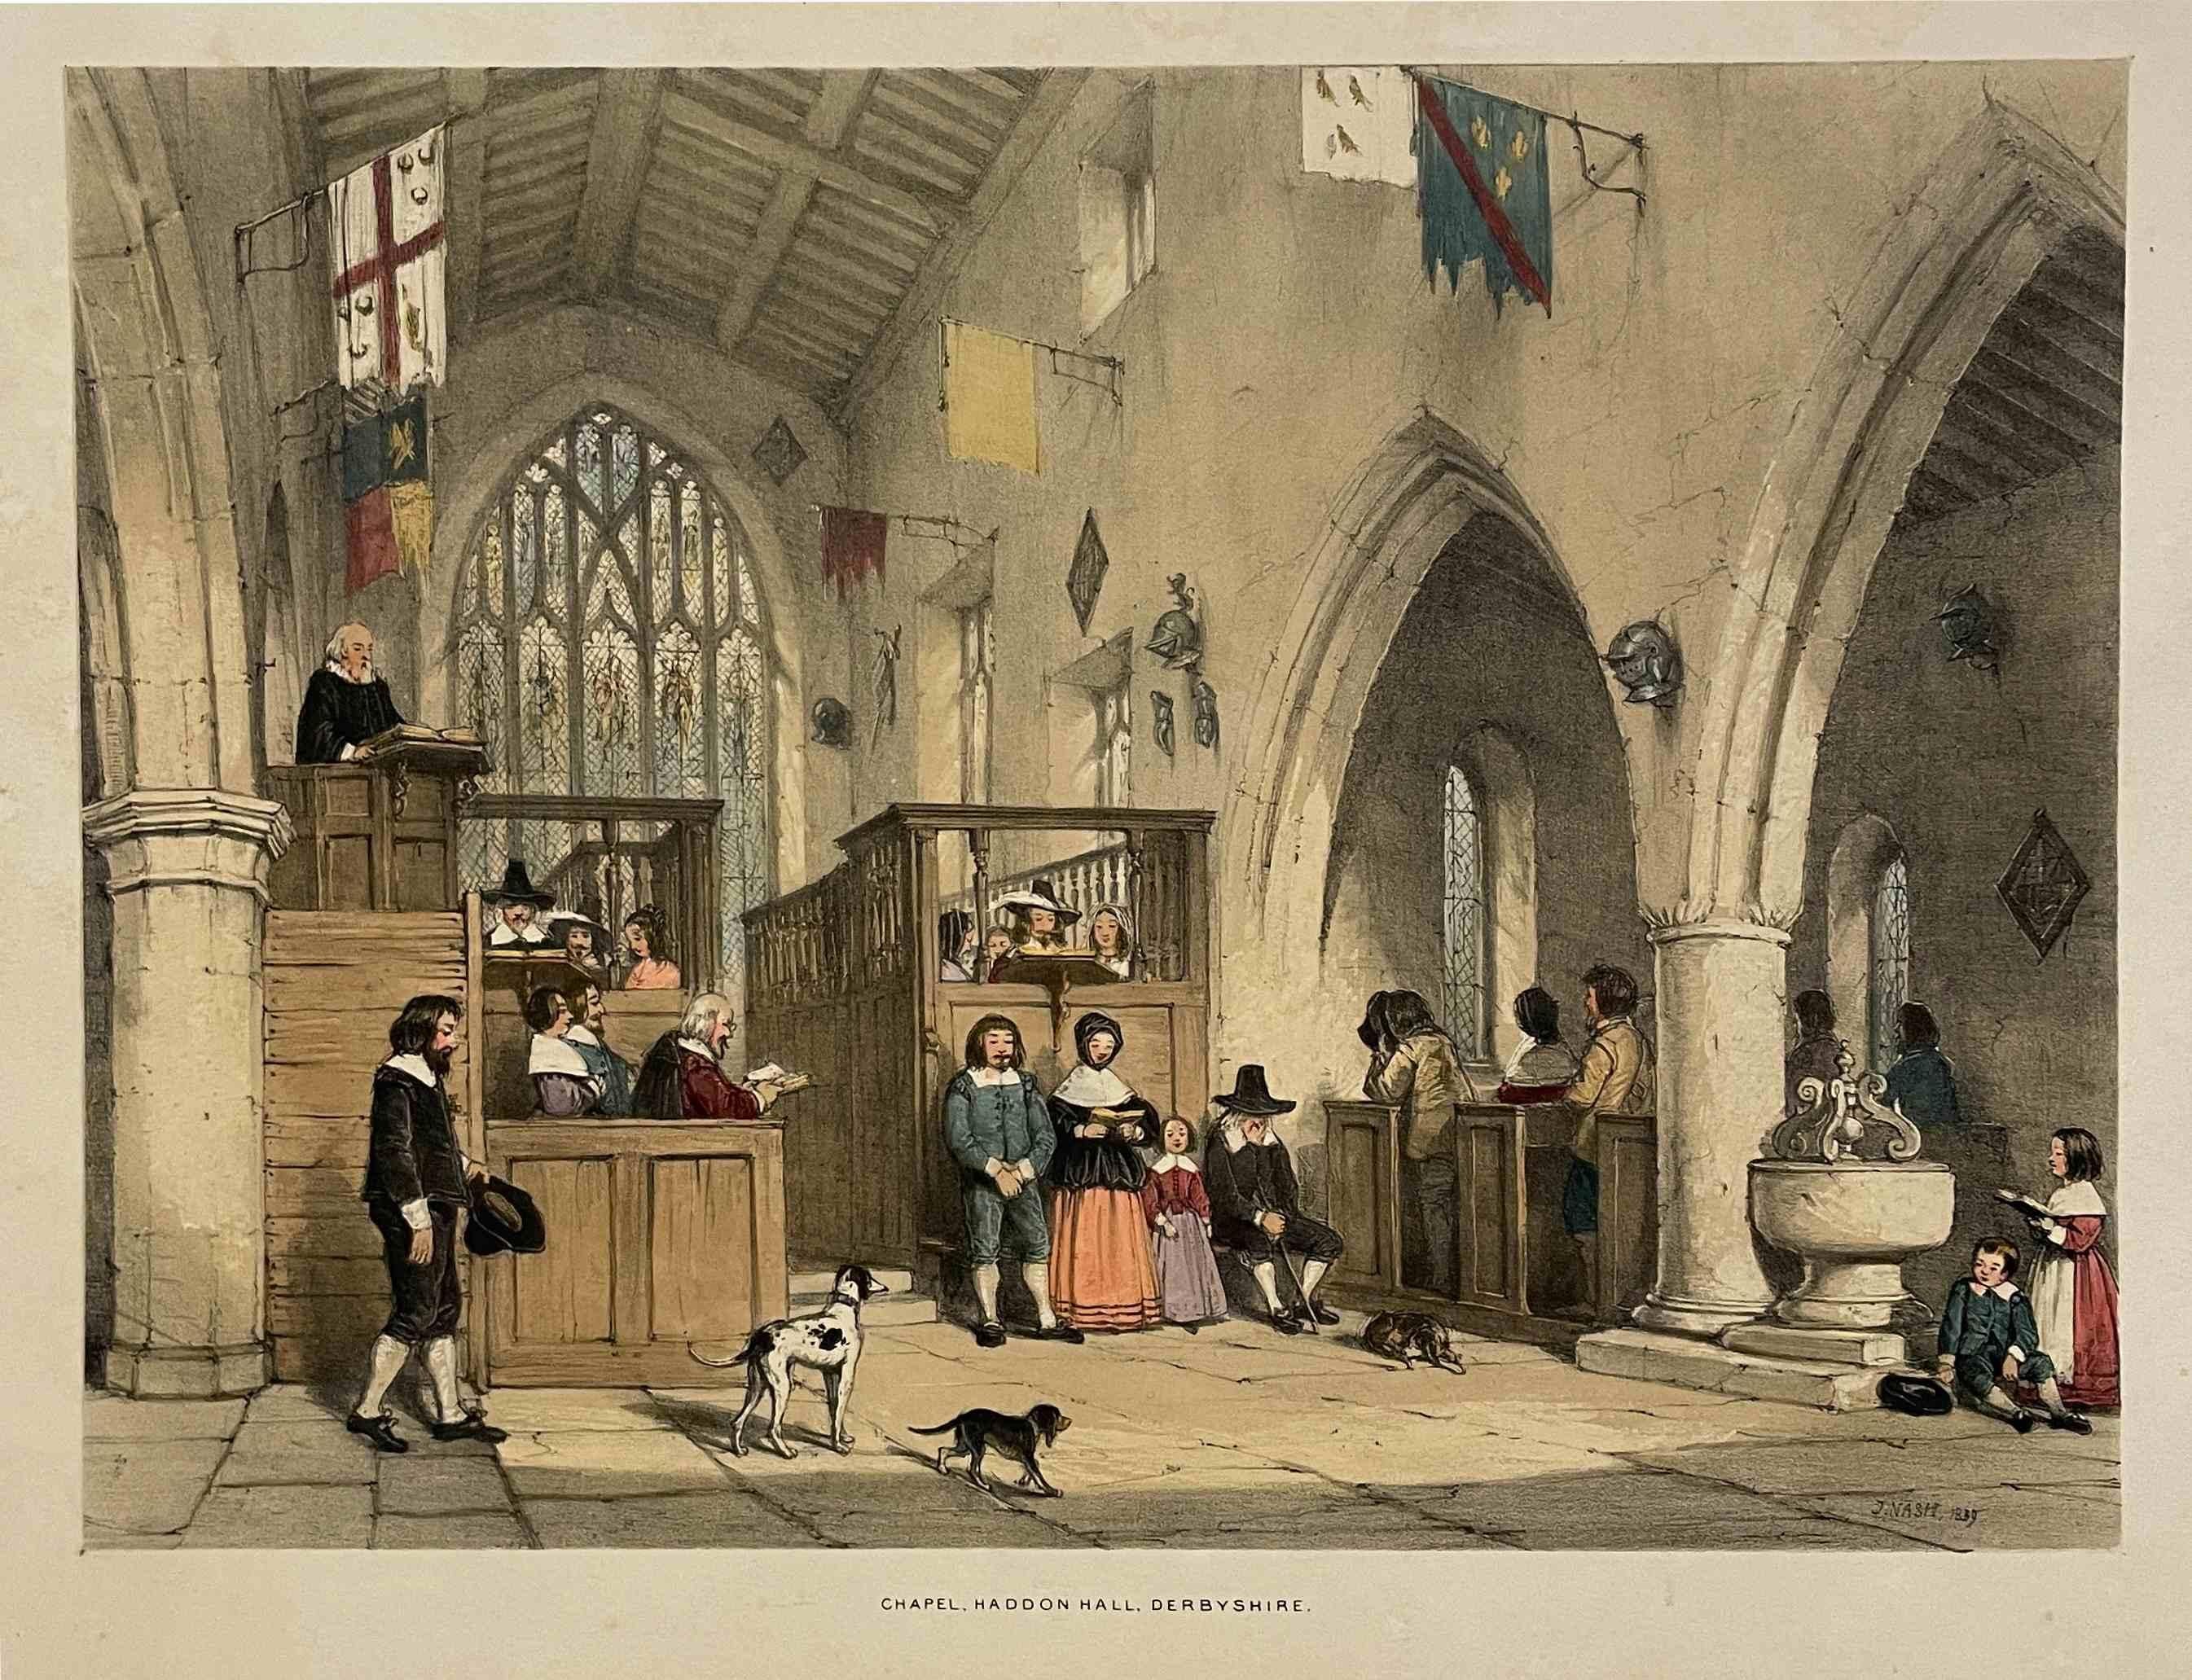 Joseph Nash Interior Print - Chapel, Haddon Hall, Derbyshire, from "The Mansions of England in the Olden Time